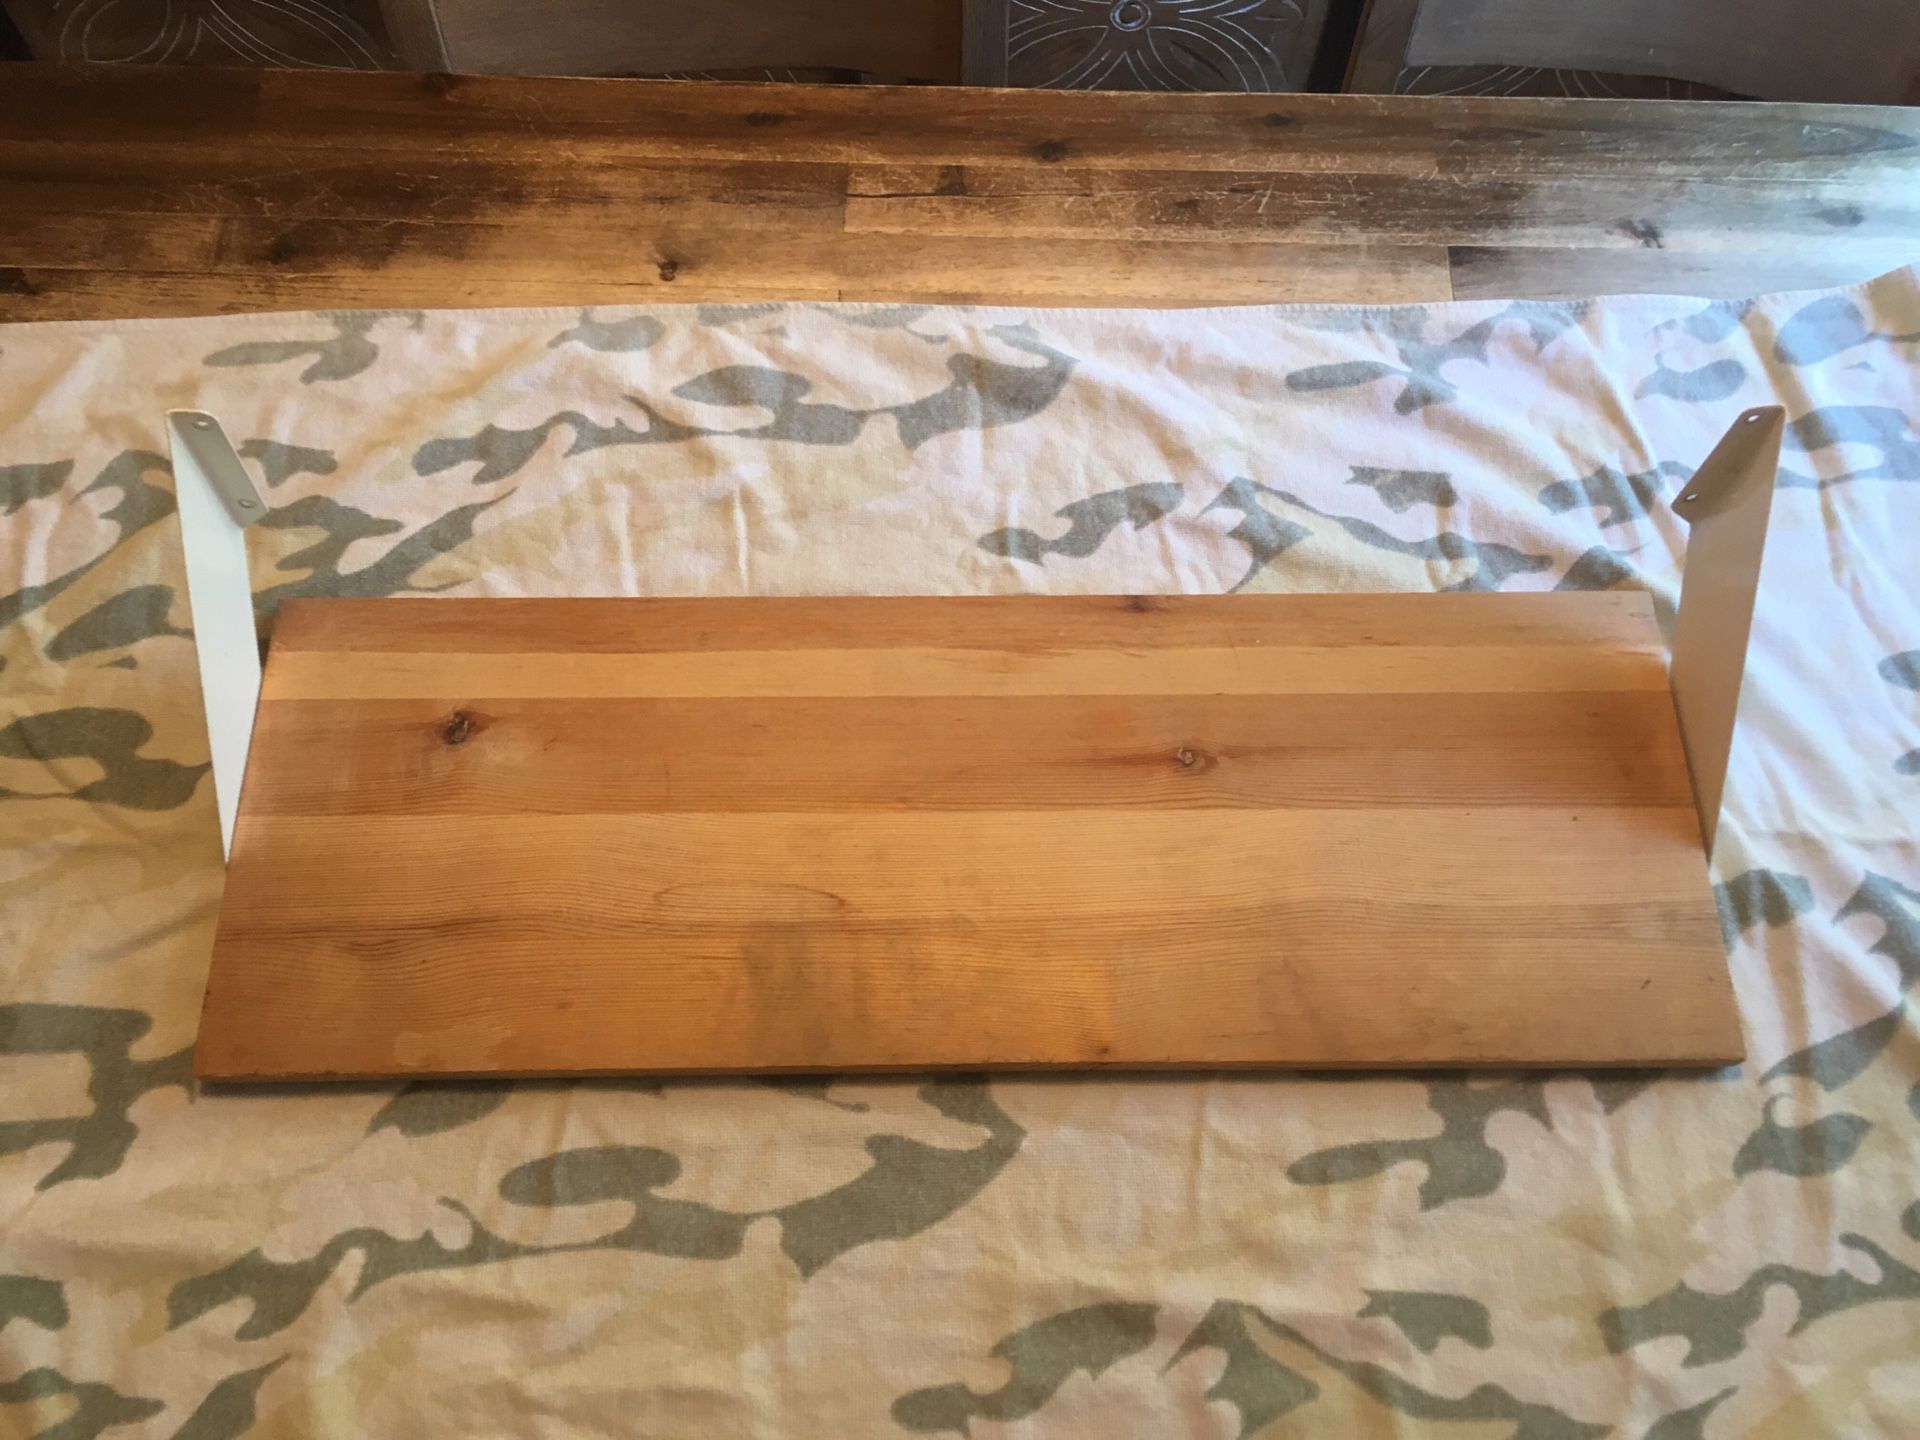 For wall shelves – pine with white brackets - 27 1/2 x 9 1/2” - five dollars each